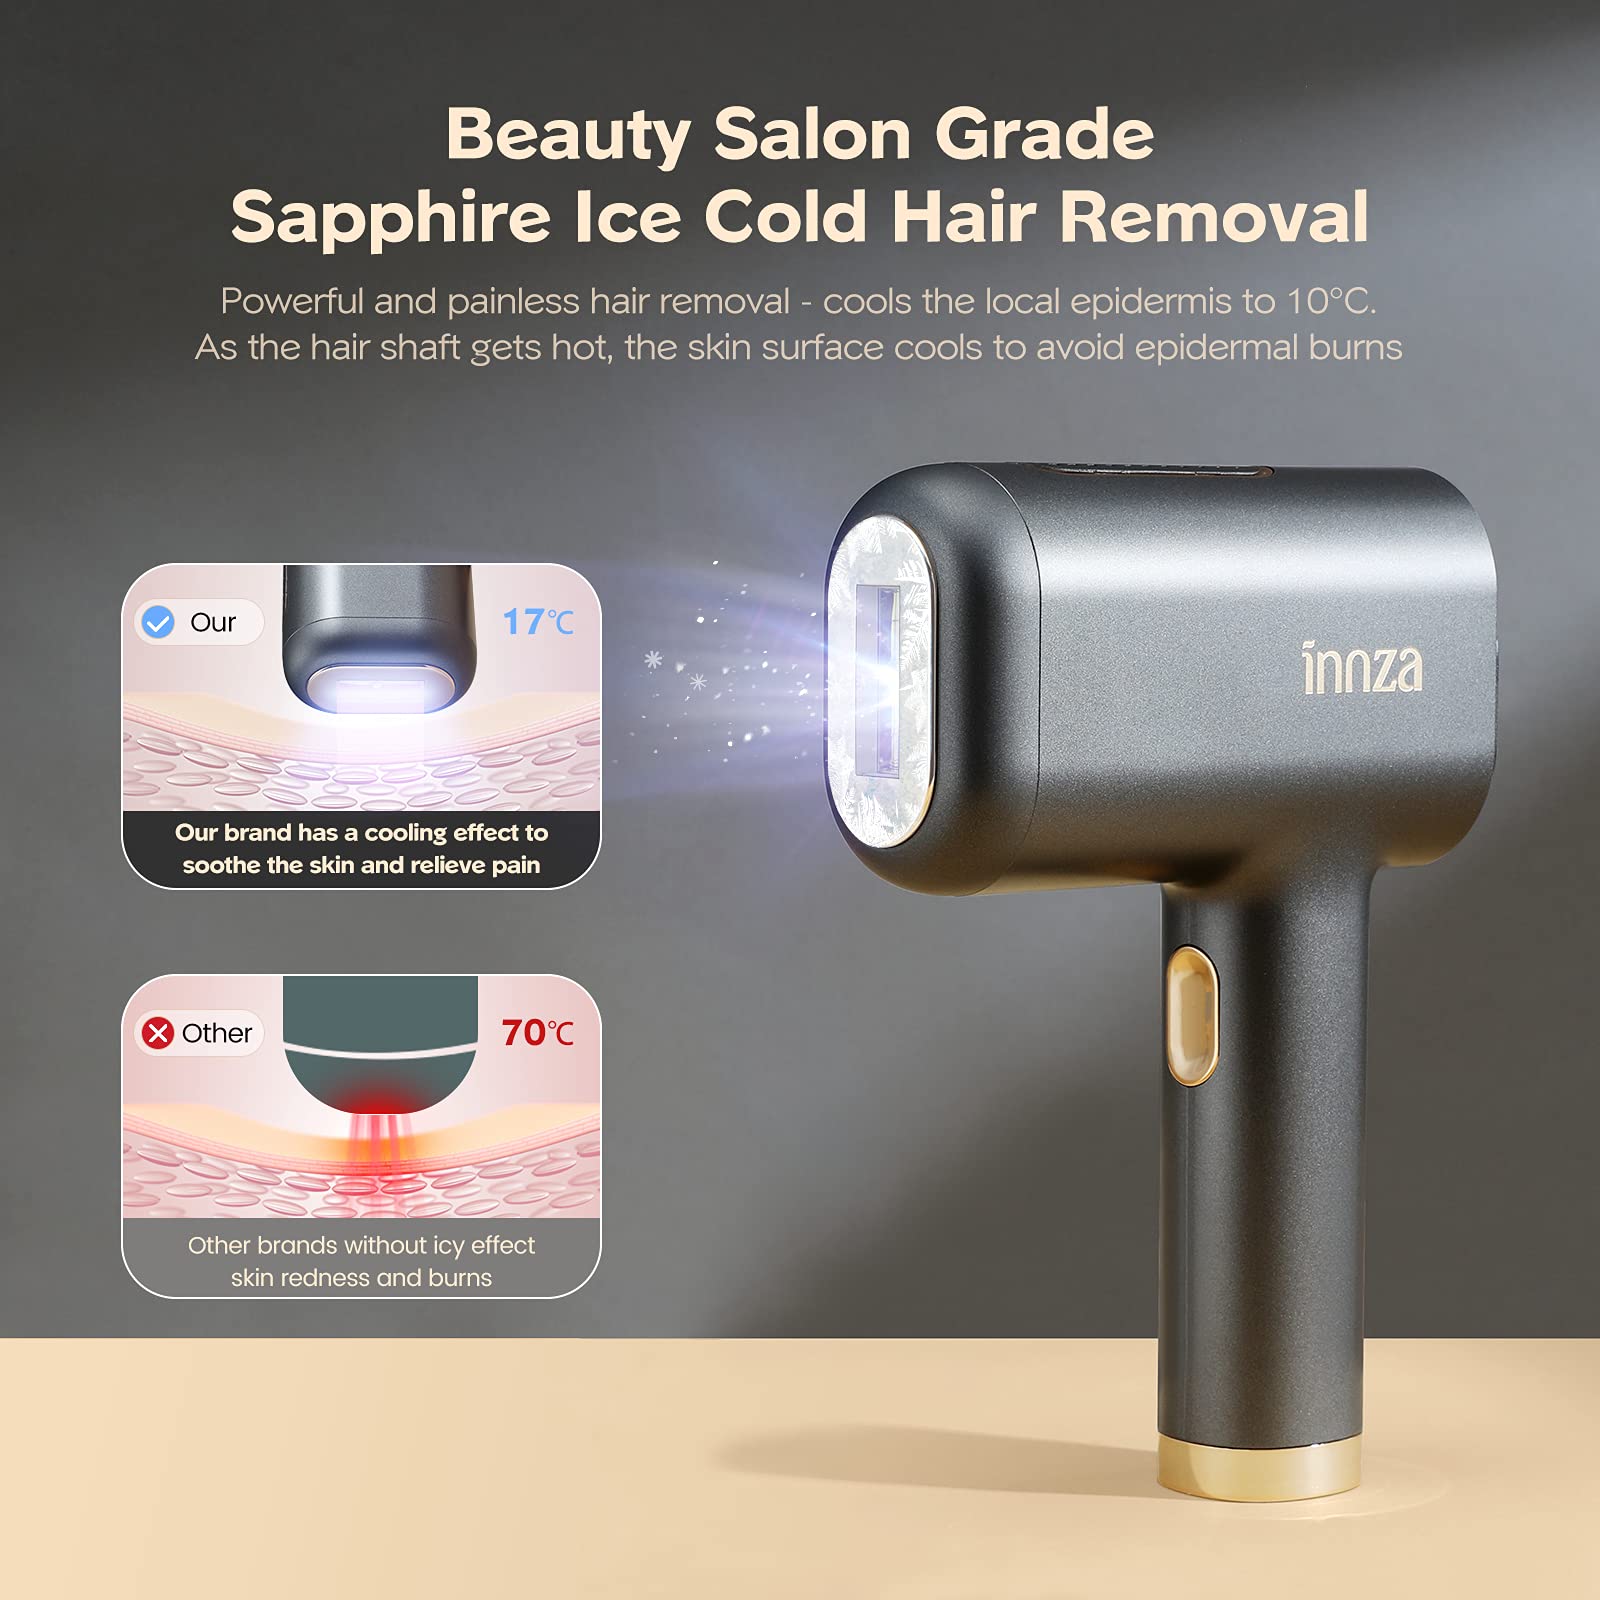 INNZA Laser Hair Removal Device with Sapphire Ice Cooling Function,Upgraded 999999 Flashes IPL Hair Removal Permanent for Women and Men,Depiladora Laser for Facial,Body, Bikini Line,Corded